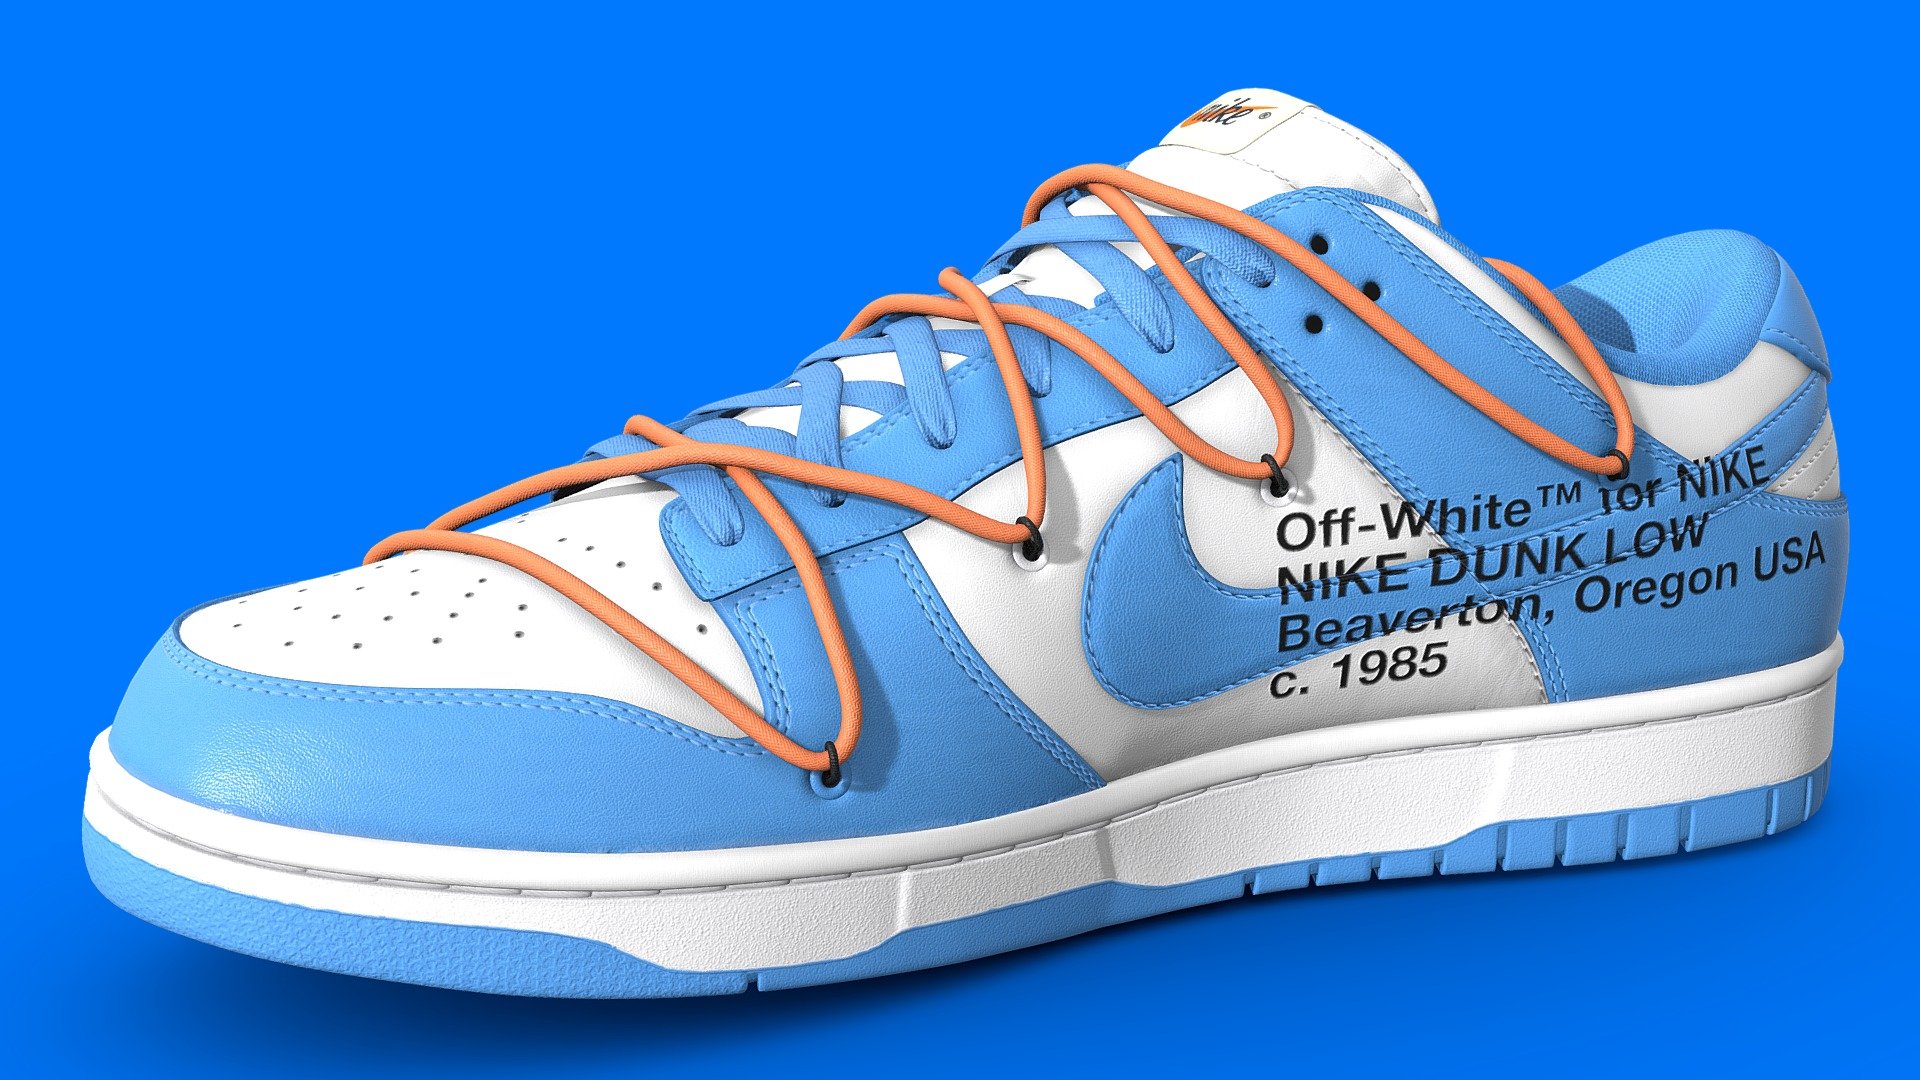 Off White collaboration with Nike on a Dunk low in University Blue, made in Blender, textured in Substance. An unreleased pair of Off white Dunks, this colourway is inspired by a sample. 

Every detail was made in the recreation of this shoe, from the text on the medial side of the shoe to the subtlety of each material, nothing went overlooked. The model itself is subdivision ready and consists of four texture sets. The model on display is at Subdivision level 1 and each texture is at 4096x4096 resolution

Download File Contents:
1. Native Blender file with linked textures
2. Folder containing all textures in 4096x4096 png format. 
3. FBX and OBJ versions of the shoes - Off White x Nike Dunk University Blue Shoe - Buy Royalty Free 3D model by Joe-Wall (@joewall) 3d model